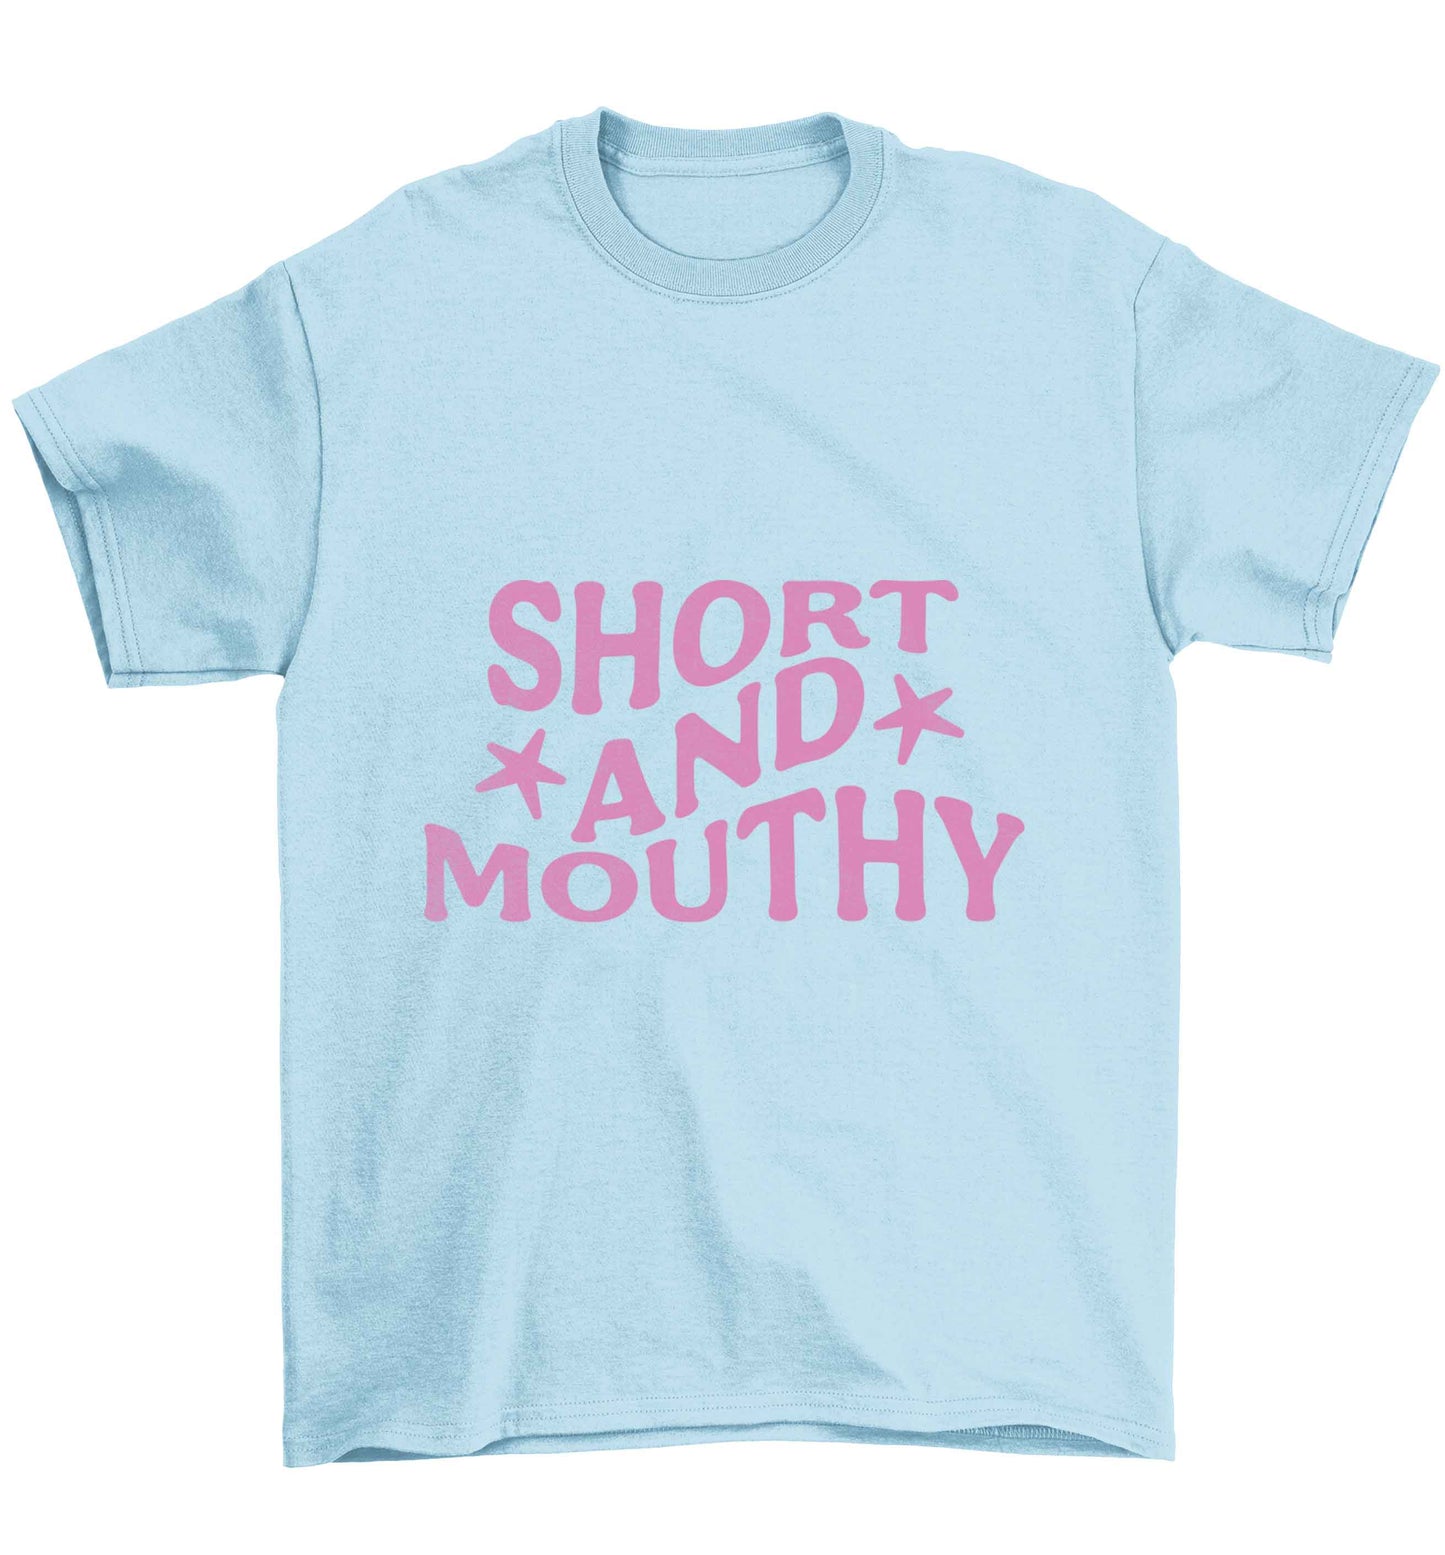 Short and mouthy Children's light blue Tshirt 12-13 Years